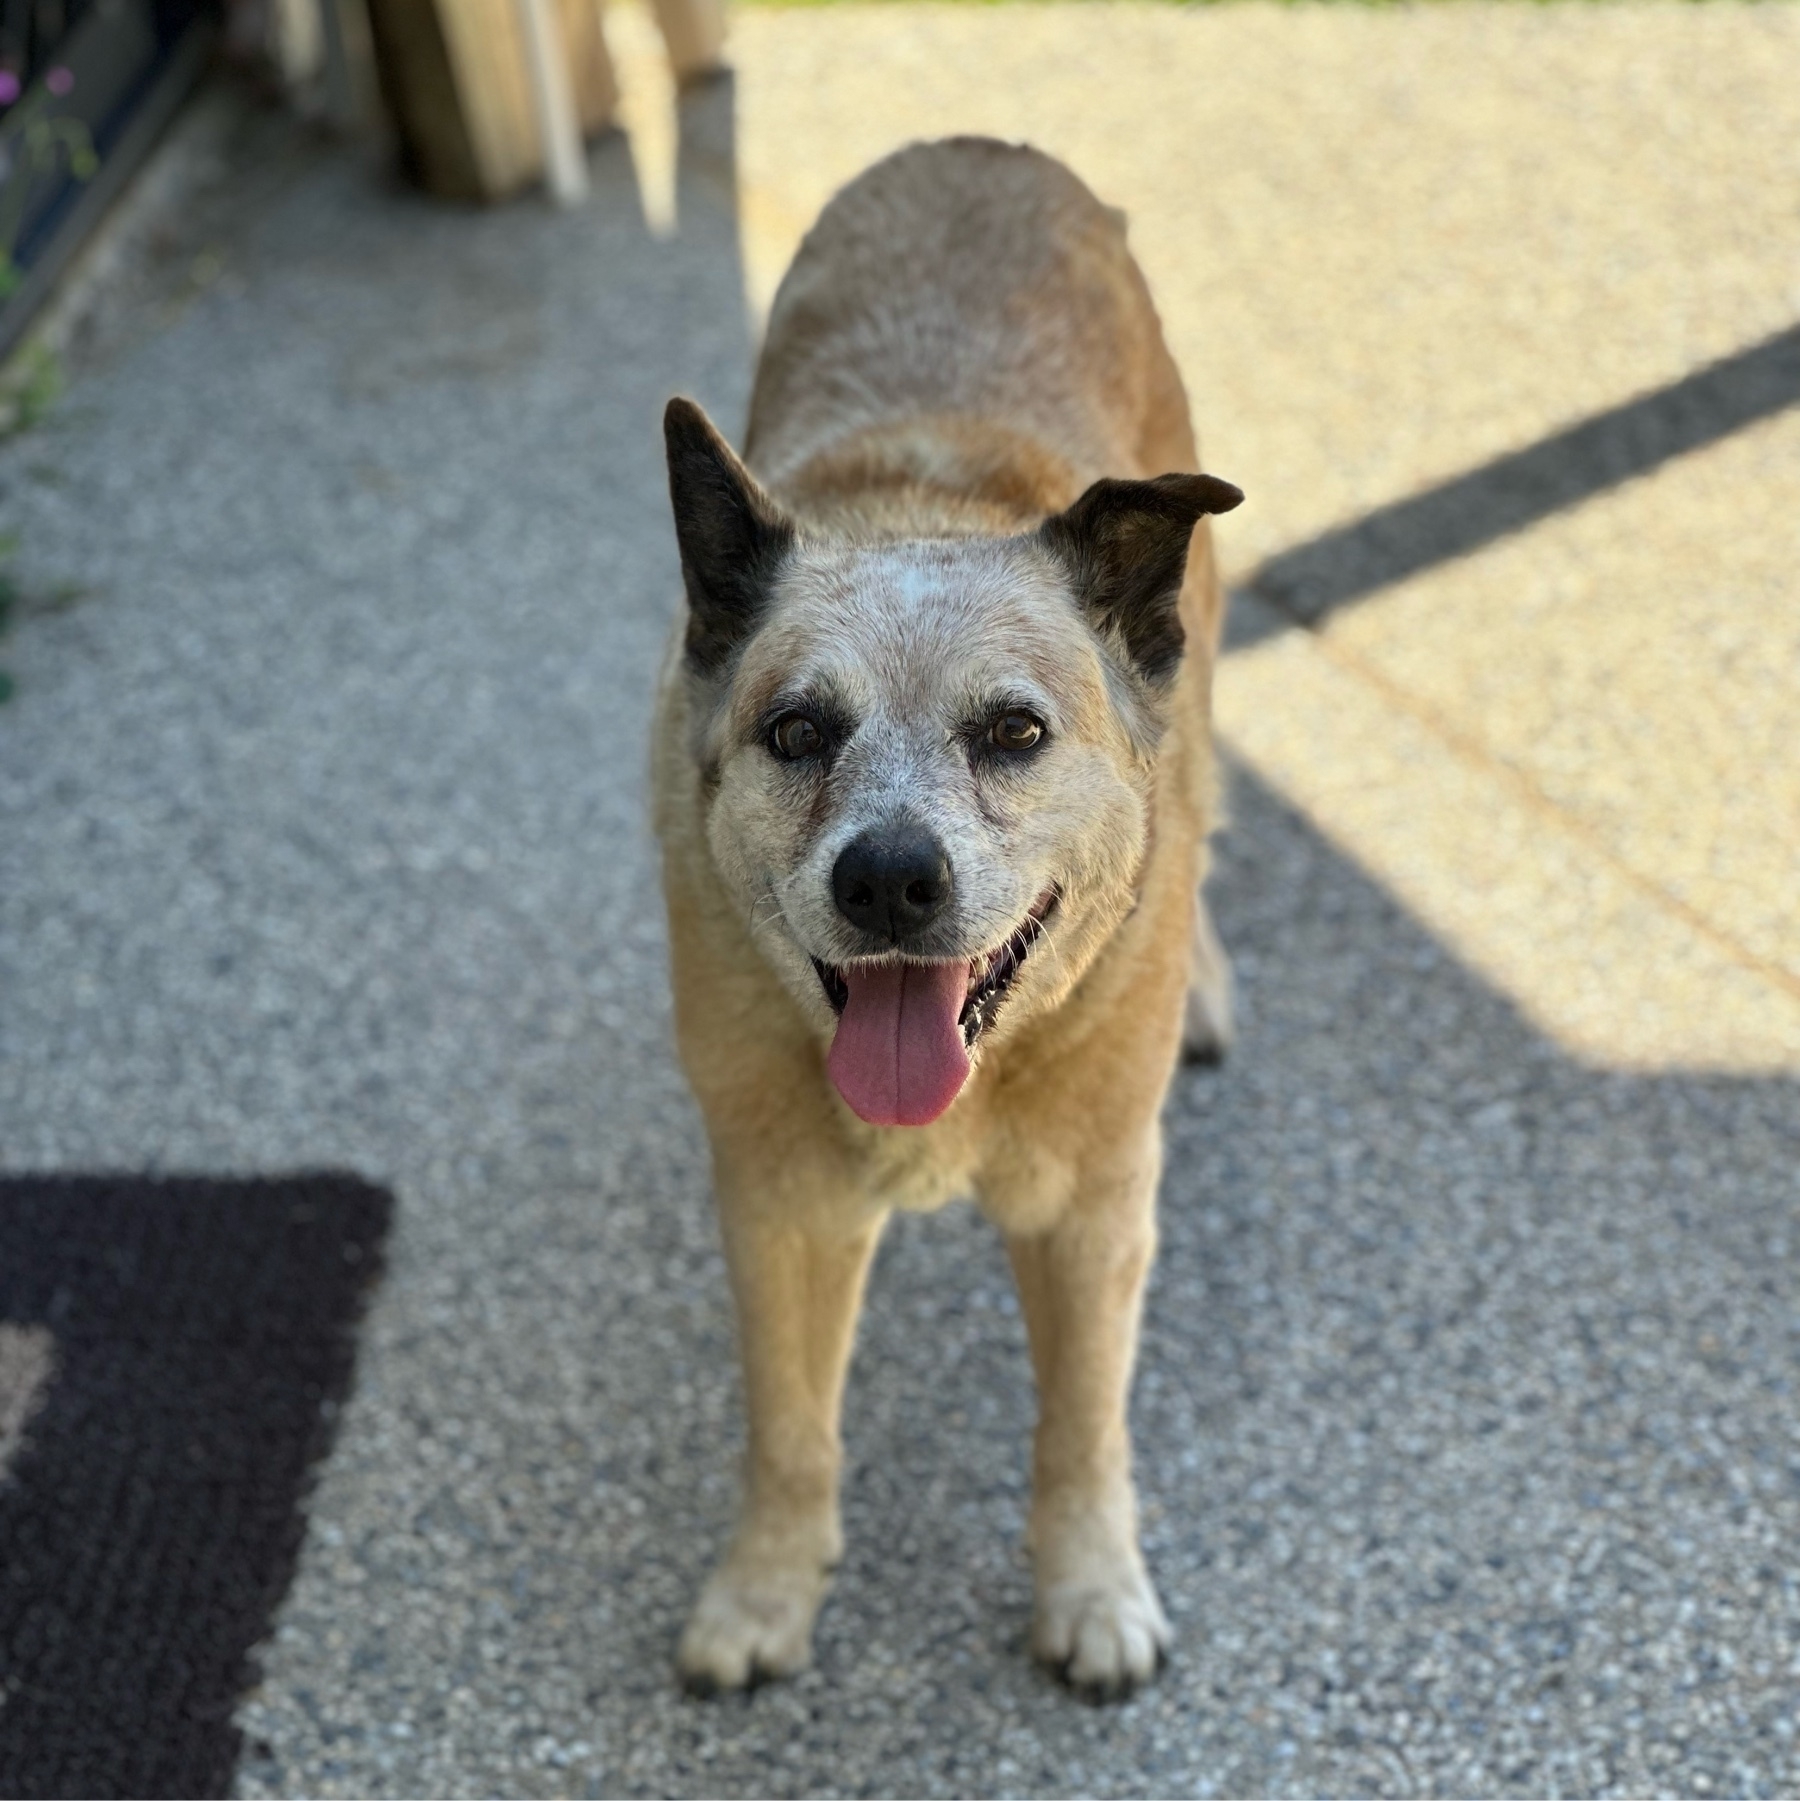 A cattle dog looking straight at the camera. Her body is a faded yellow colour and her head is white from age. Her tongue is hanging out and one ear is drooping half over. She’s standing on pebbled cement.